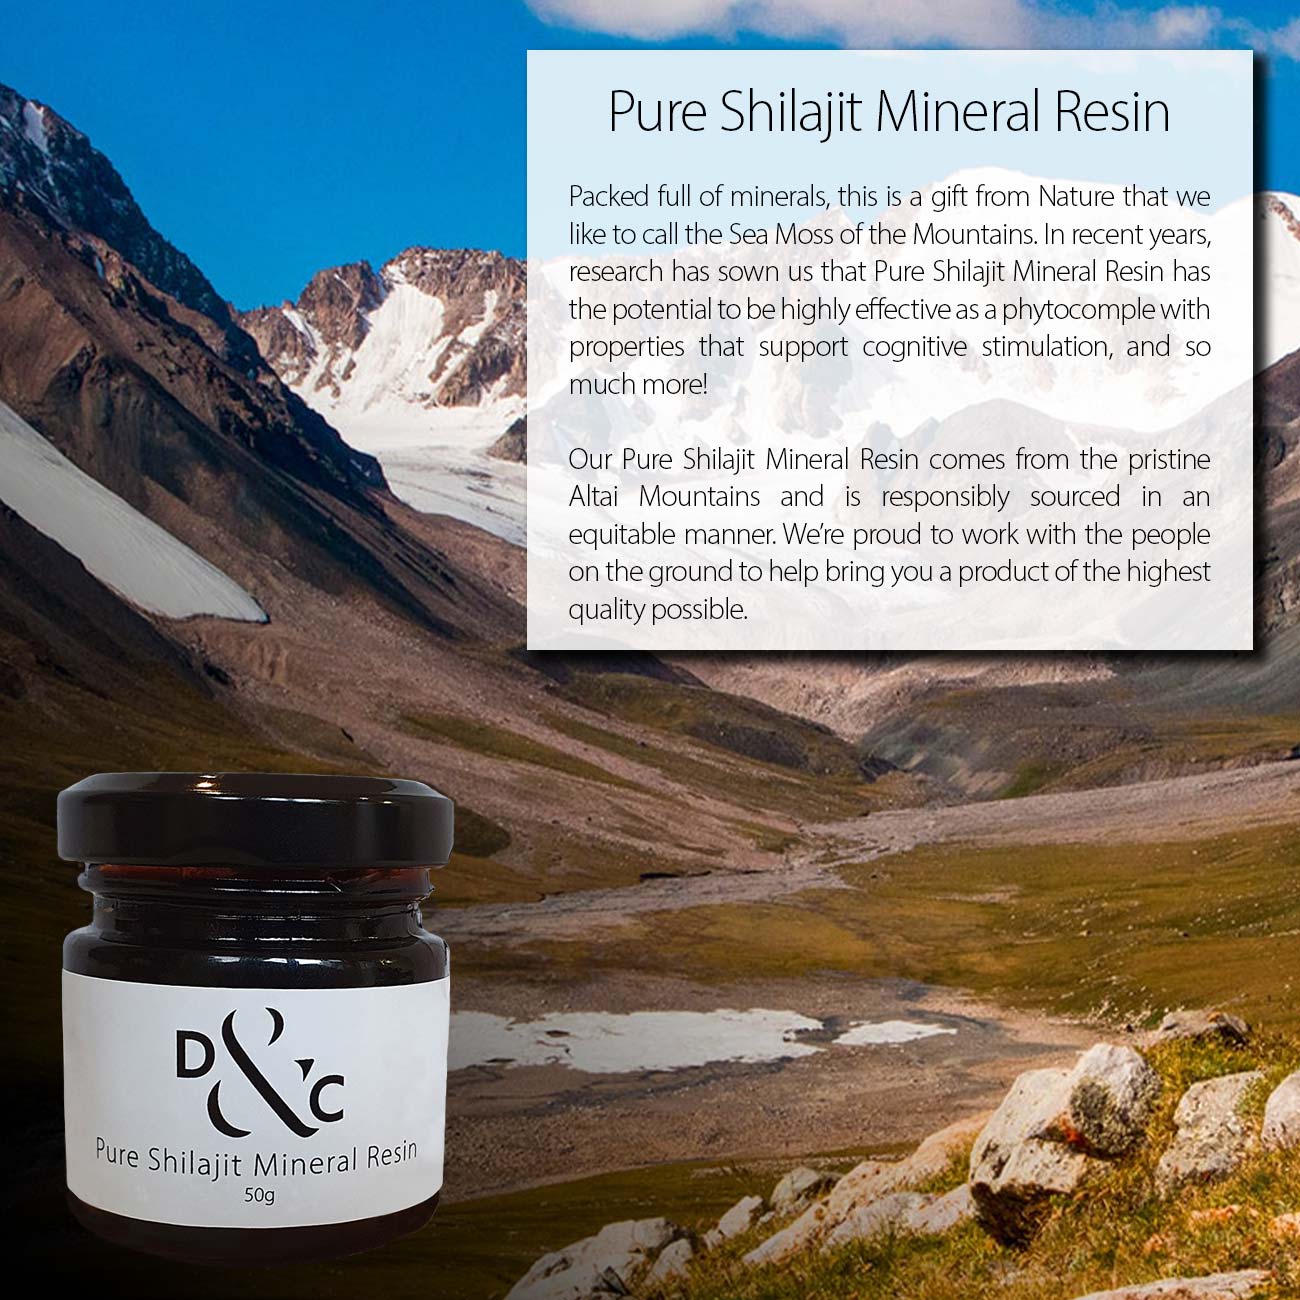 Pure Shilajit Mineral Resin Australia 50g in a jar. 100 portions per jar. Image of jar overlaid Altai Mountains with text box reading: Pure Shilajit Mineral Resin. Packed full of minerals, this is a gift from Nature that we like to call the Sea Moss of the Mountains. In recent years, research has sown us that Pure Shilajit Mineral Resin has the potential to be highly effective as a phytocomple with properties that support cognitive stimulation, and so much more! Our Pure Shilajit Mineral Resin comes from the pristine Altai Mountains and is responsibly sourced in an equitable manner. We’re proud to work with the people on the ground to help bring you a product of the highest quality possible.